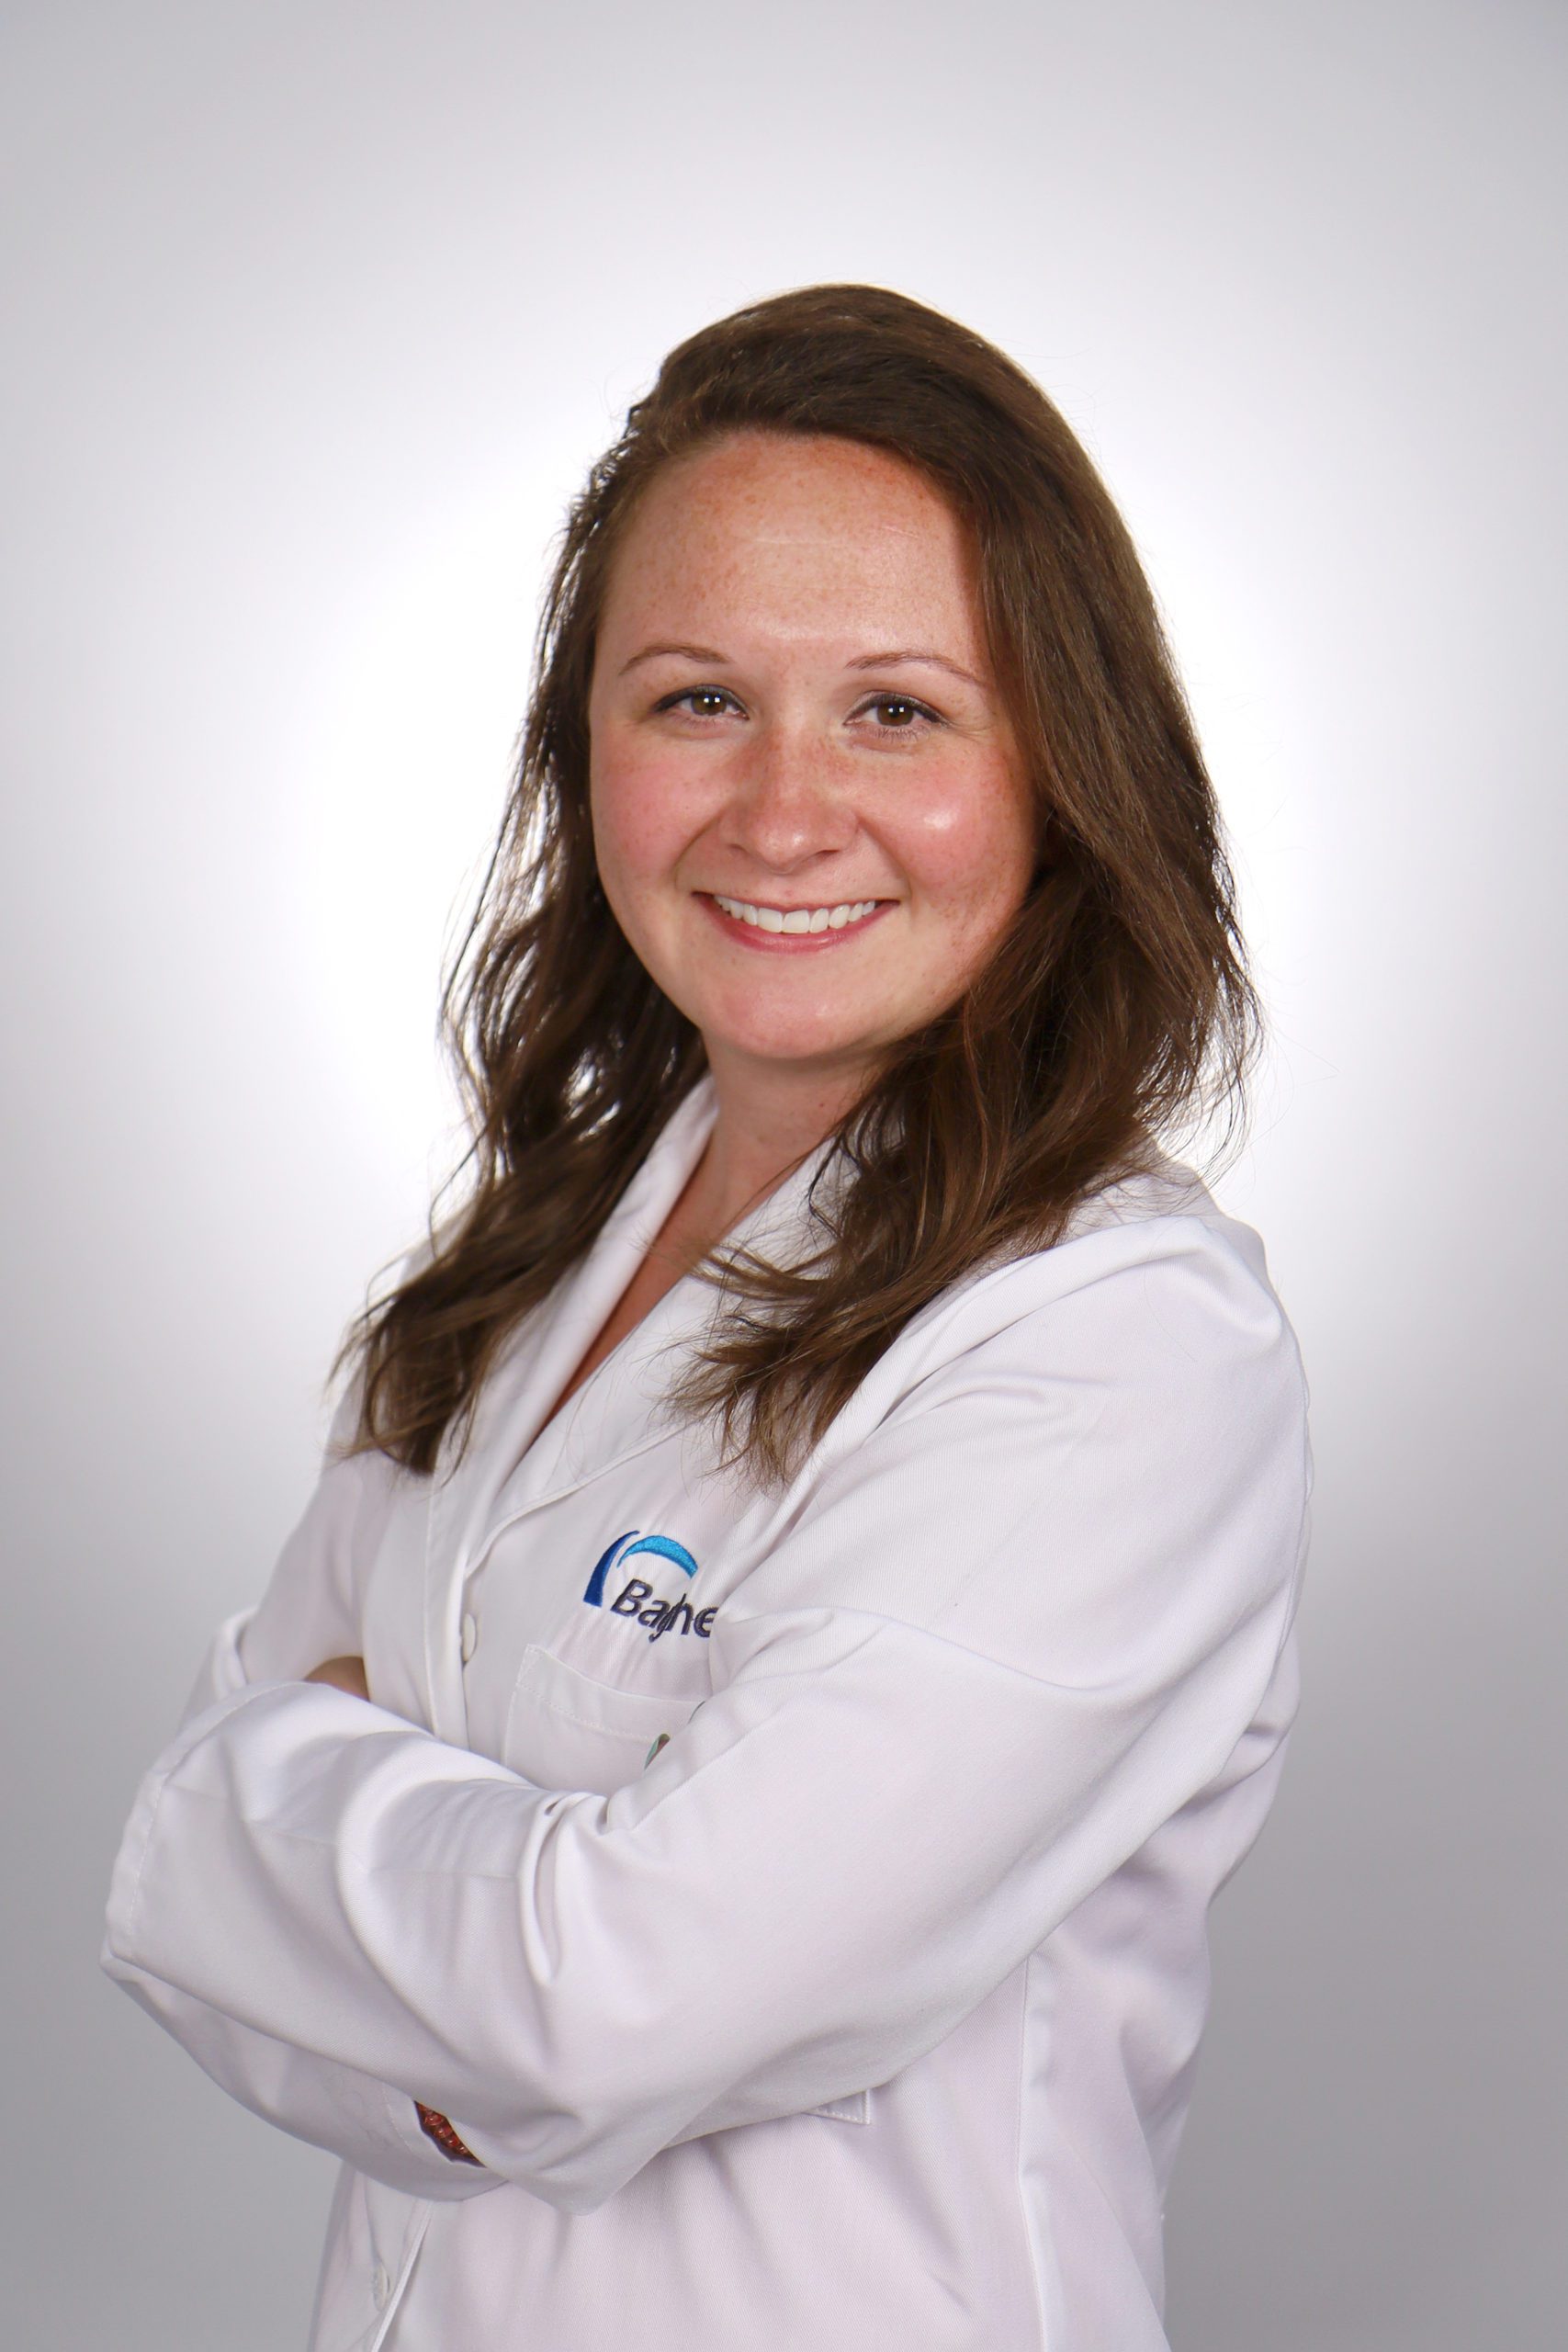 Featured image for “Bayhealth Welcomes OB-GYN Dr. Roni Dermo”